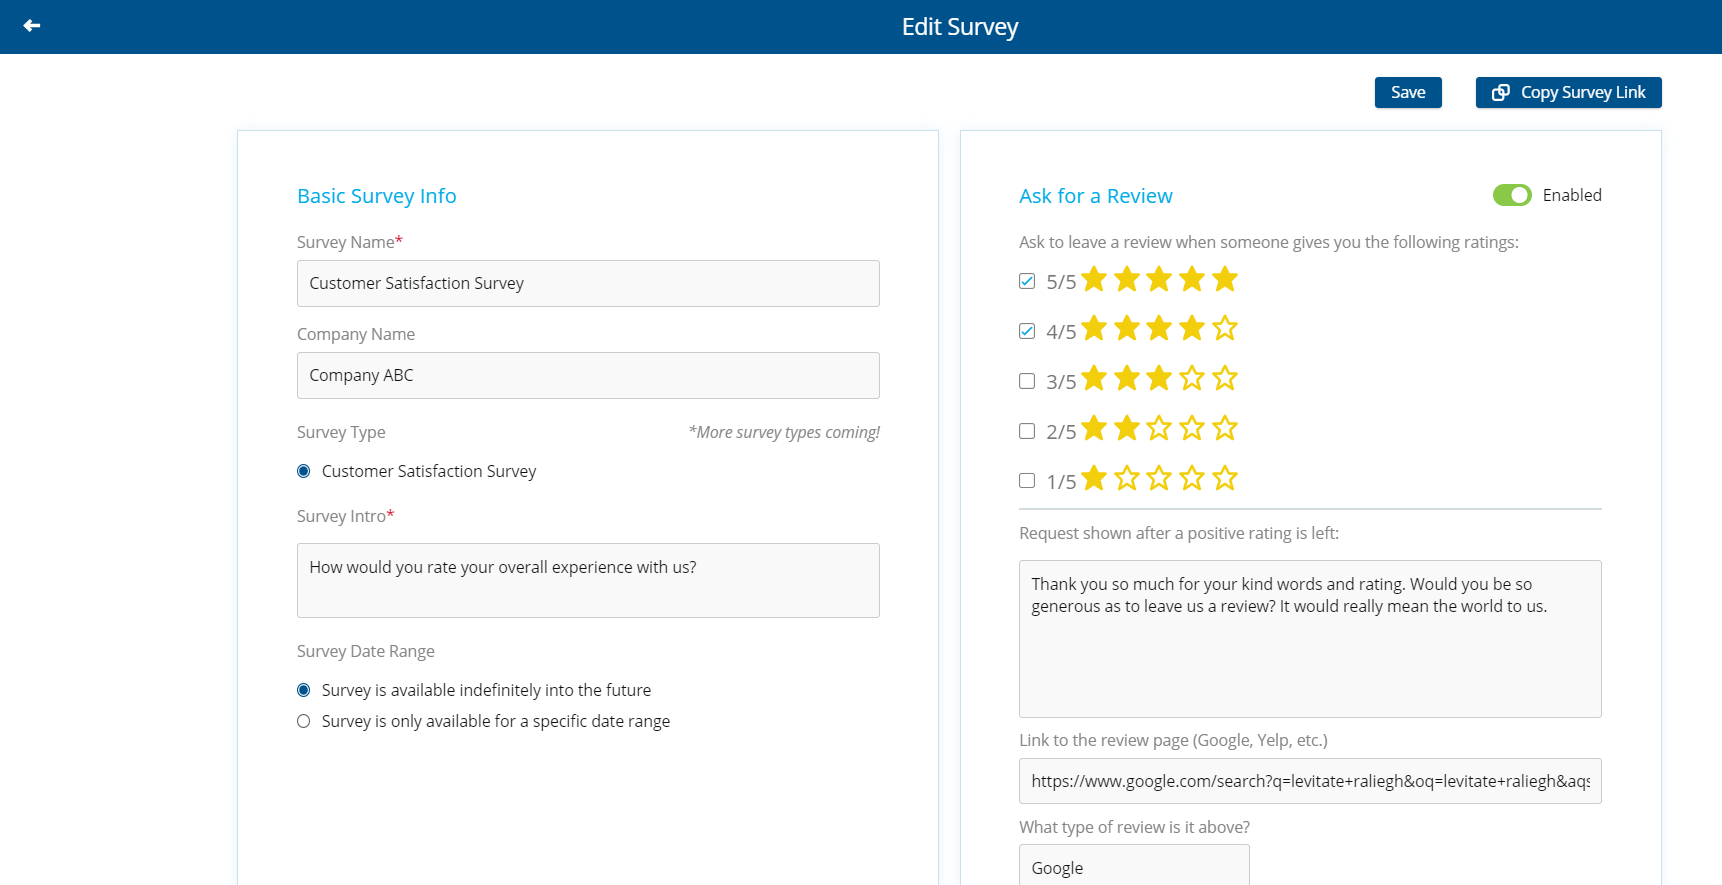 Discover your Client Happiness Score and ask for reviews from happy clients all in the same email.